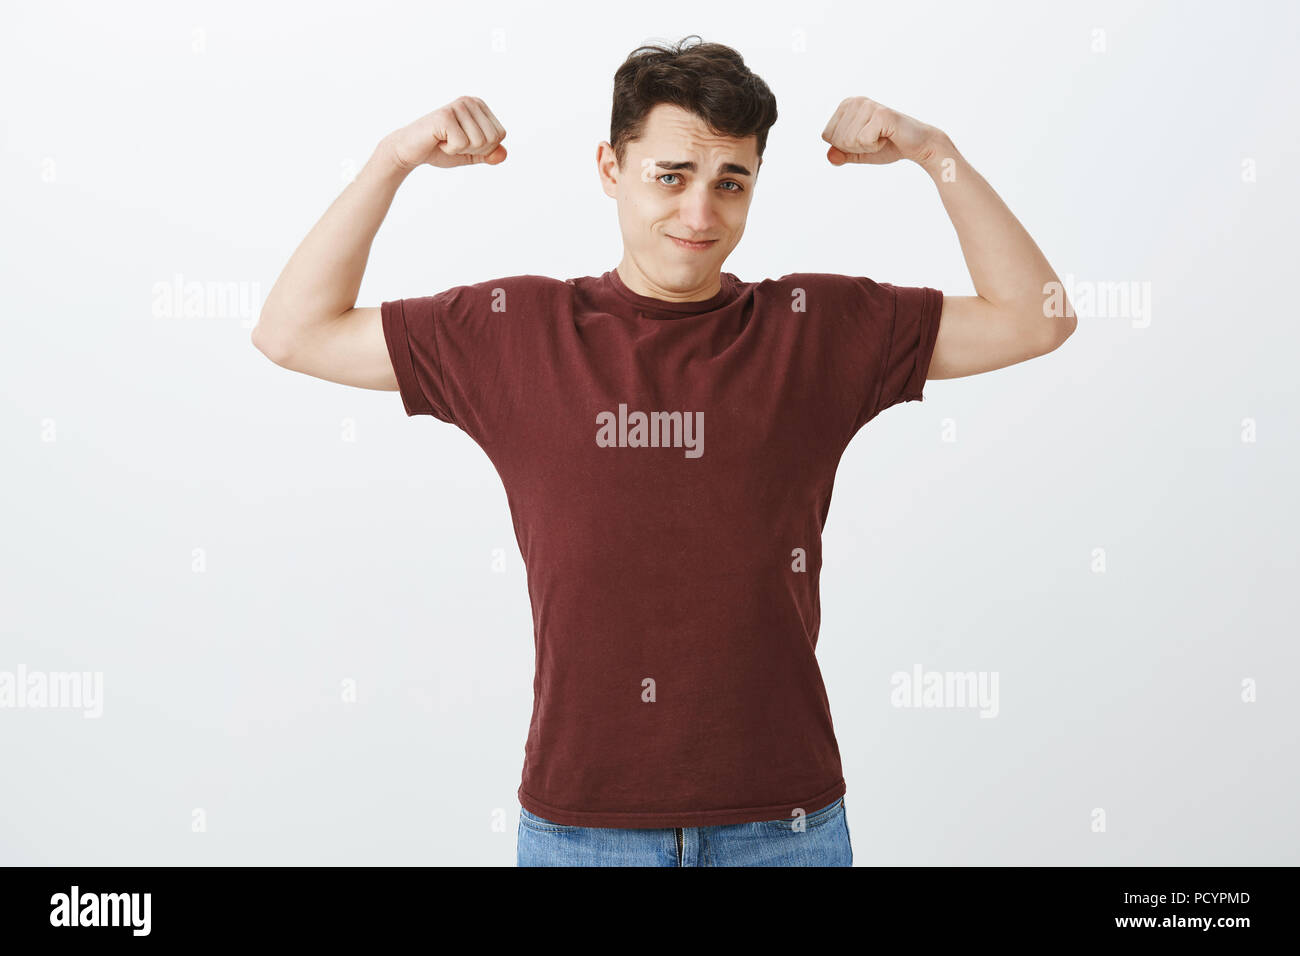 Look how strong I am. Portrait of self-assured handsome european guy in red t-shirt, raising arms and showing muscles with confident expression, bragg Stock Photo